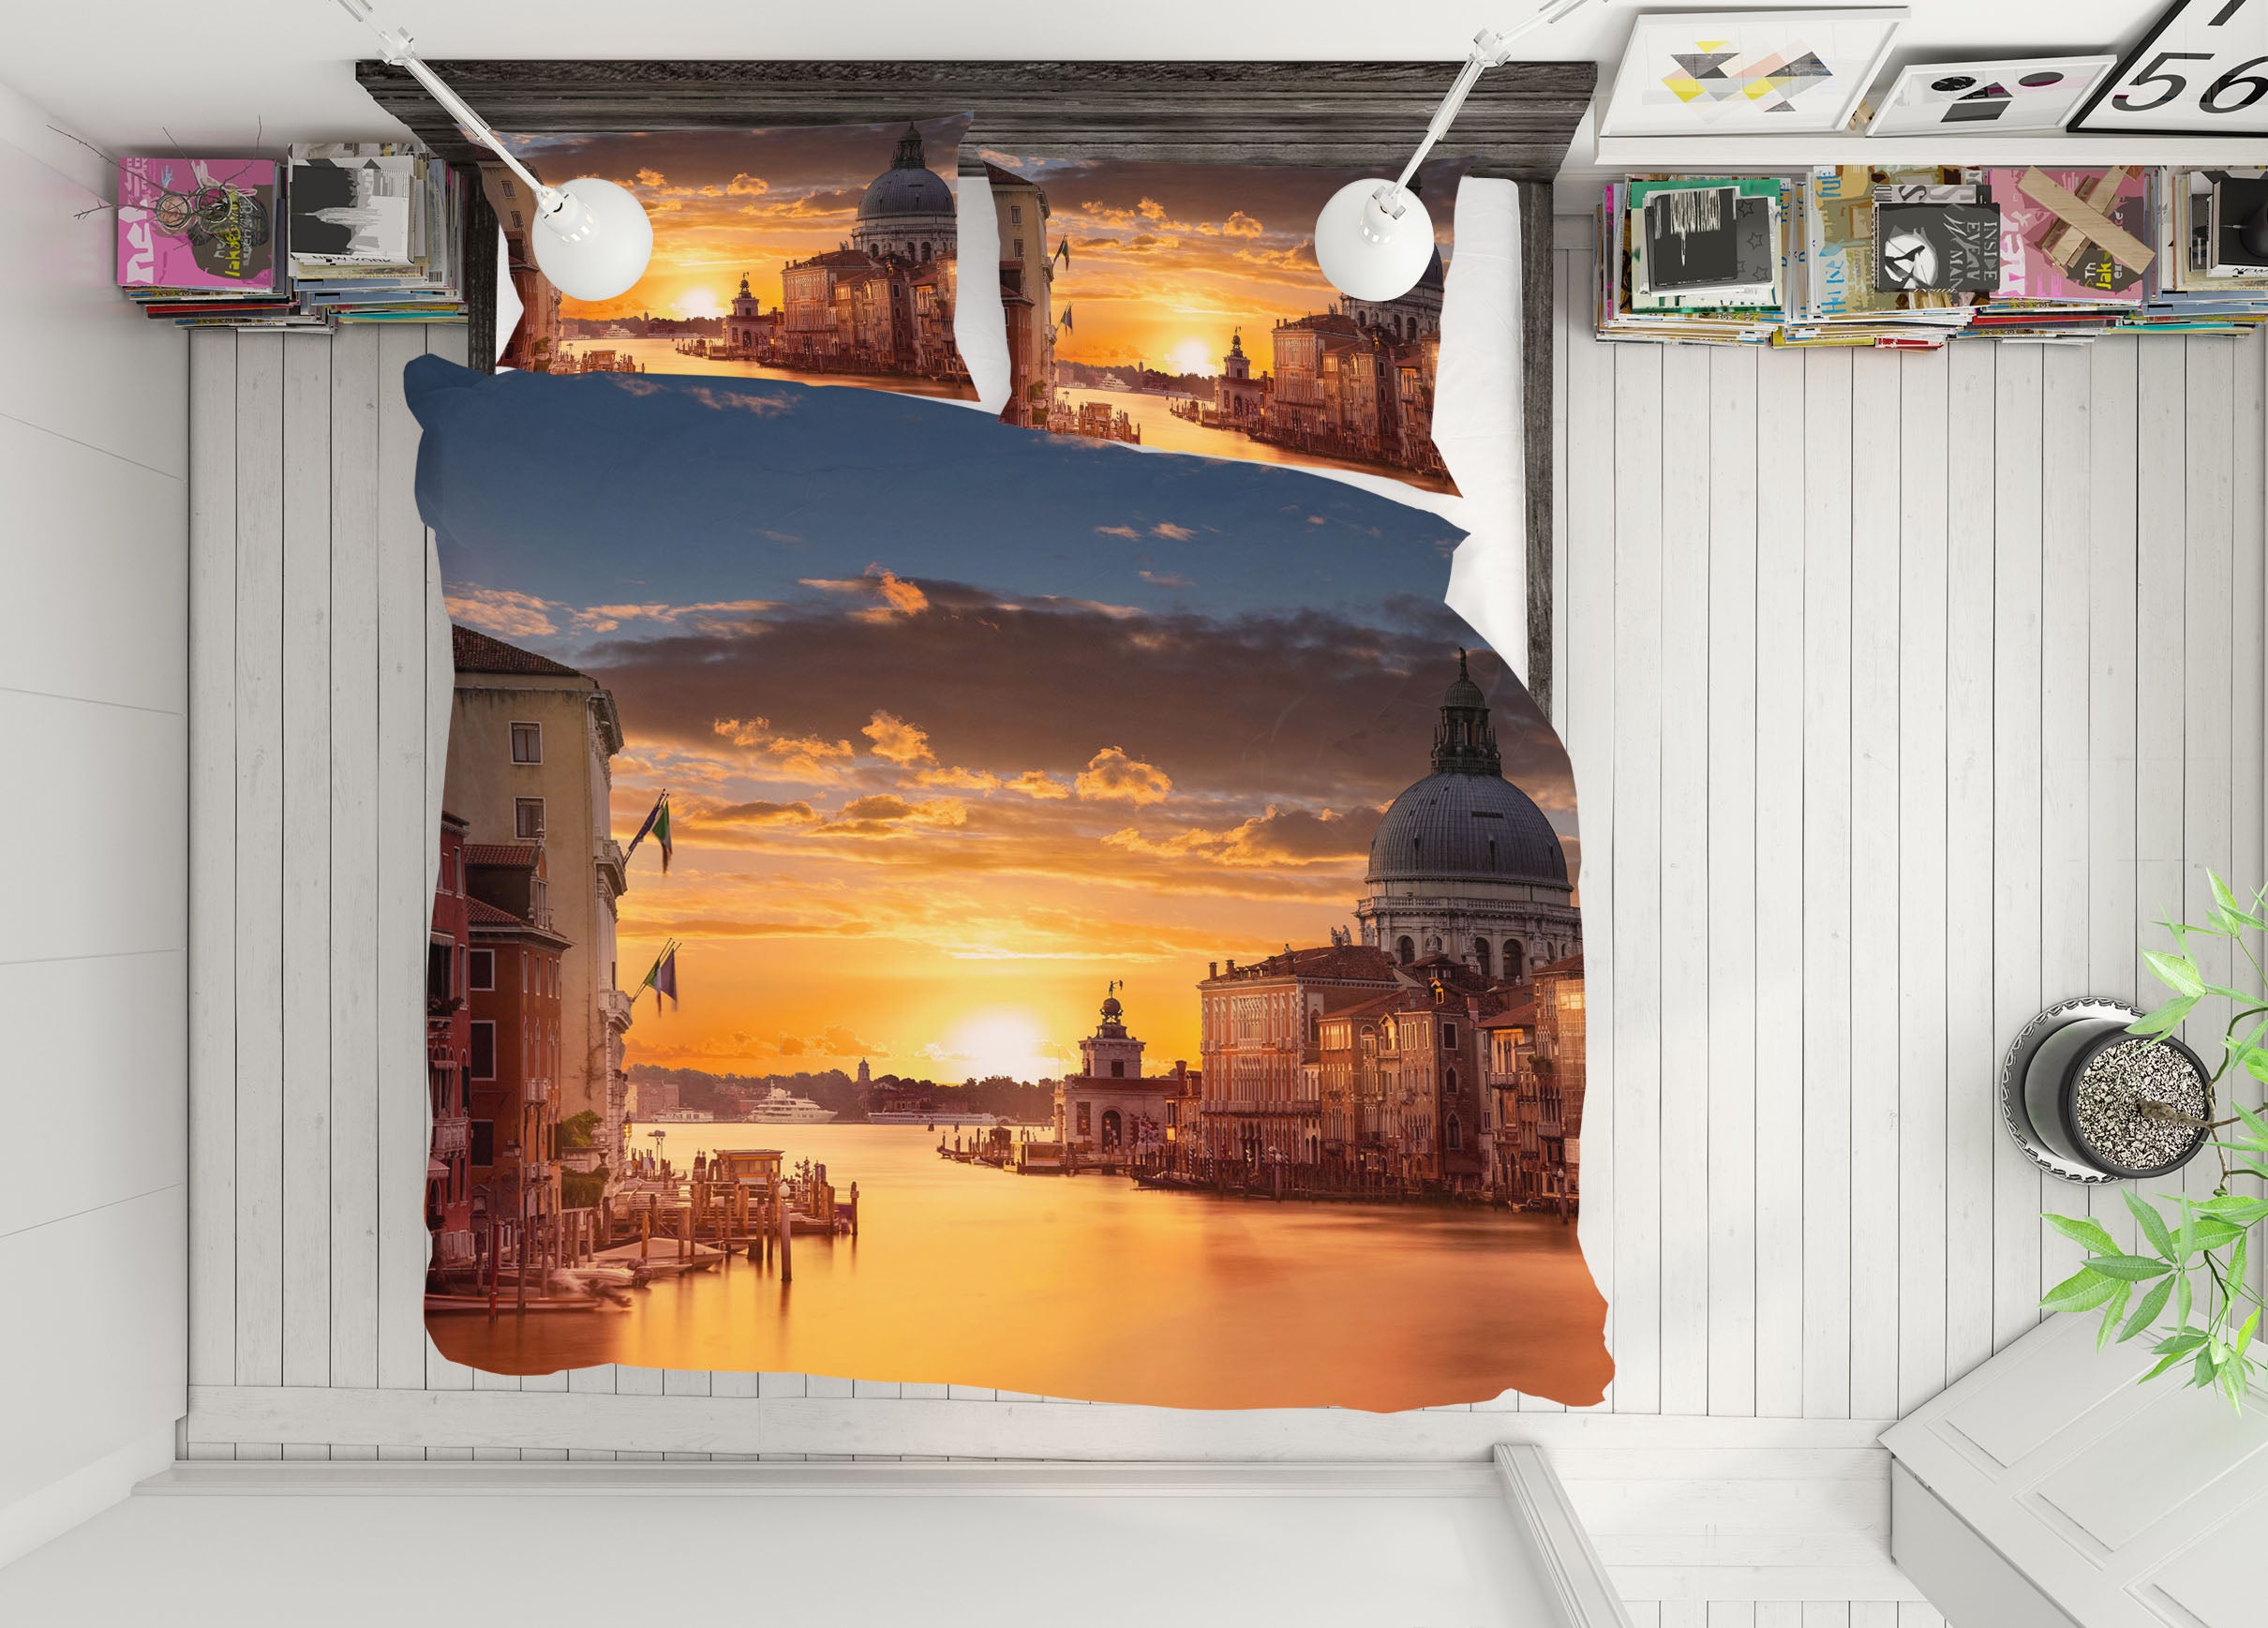 3D Sunset 2139 Marco Carmassi Bedding Bed Pillowcases Quilt